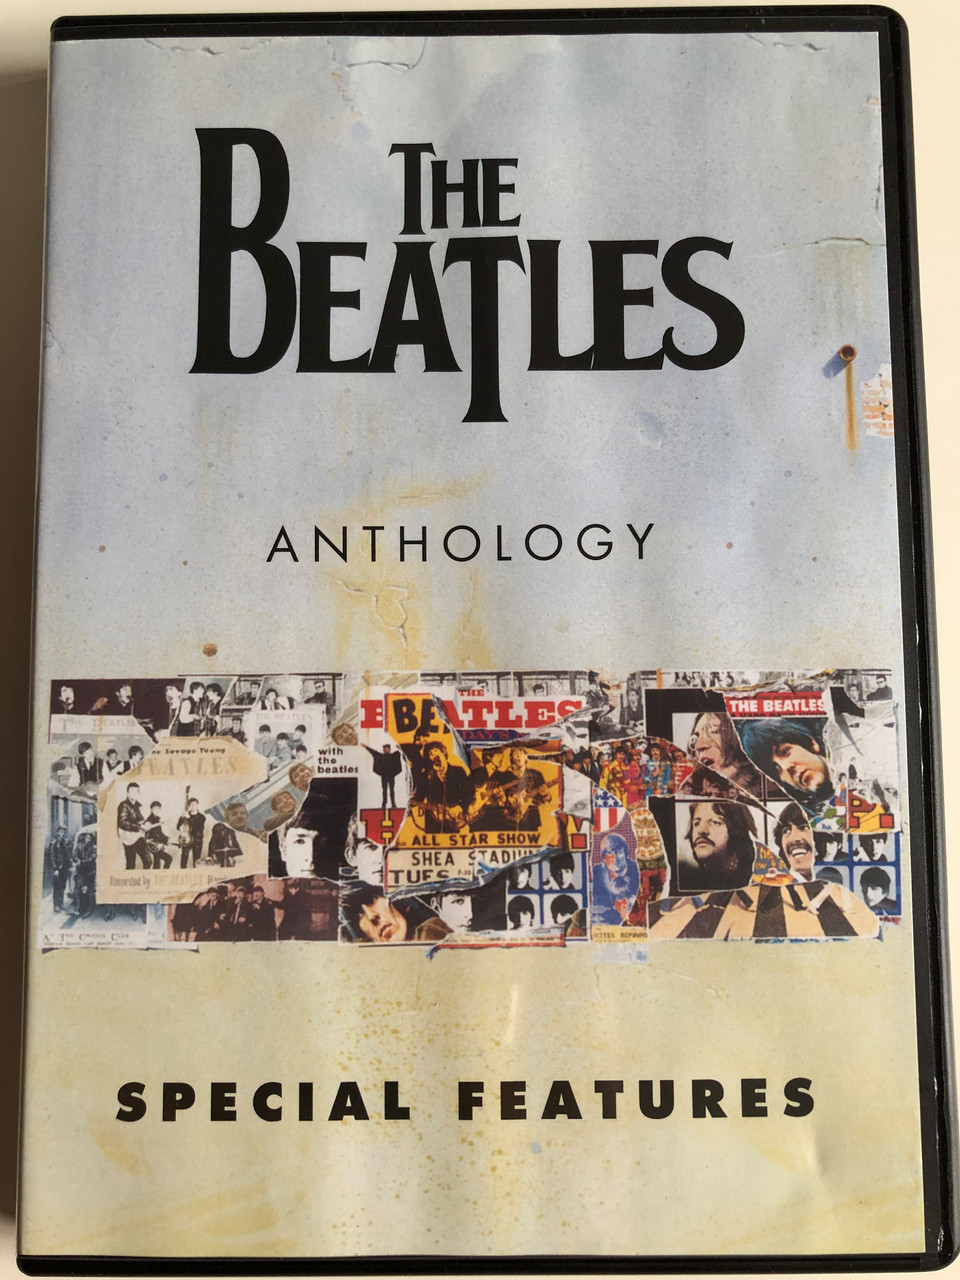 The Beatles Anthology DVD 2003 Special Features / Directed by Geoff Wonfor  Bob Smeaton / Documentary television series - bibleinmylanguage